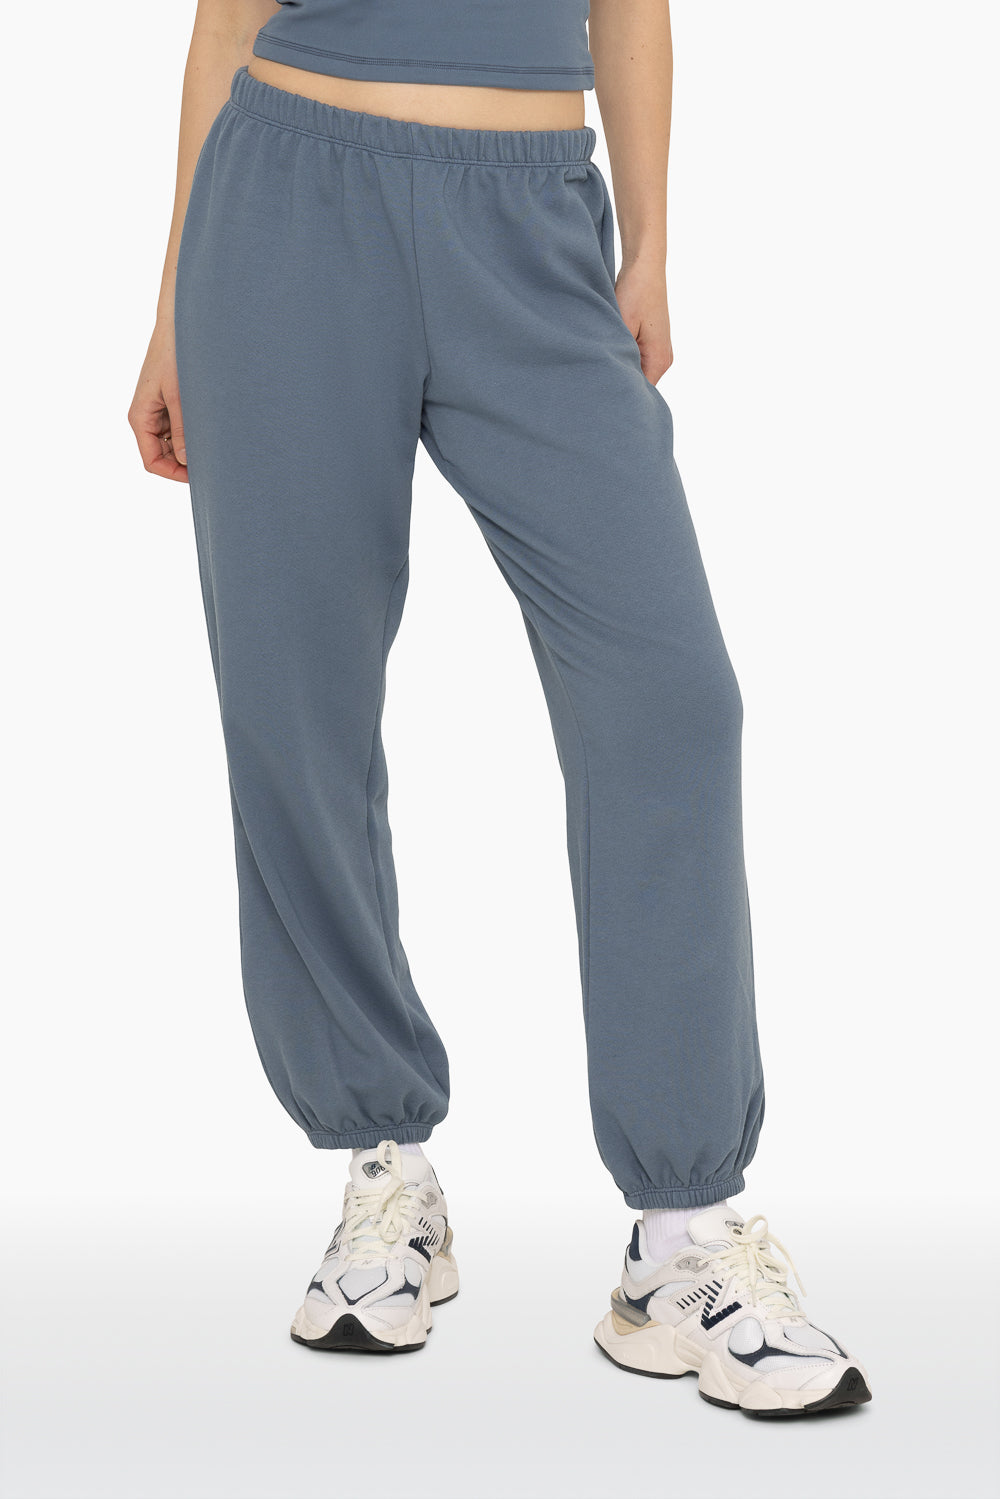 LIGHTWEIGHT SWEATS CLASSIC SWEATPANTS - MINERAL Featured Image